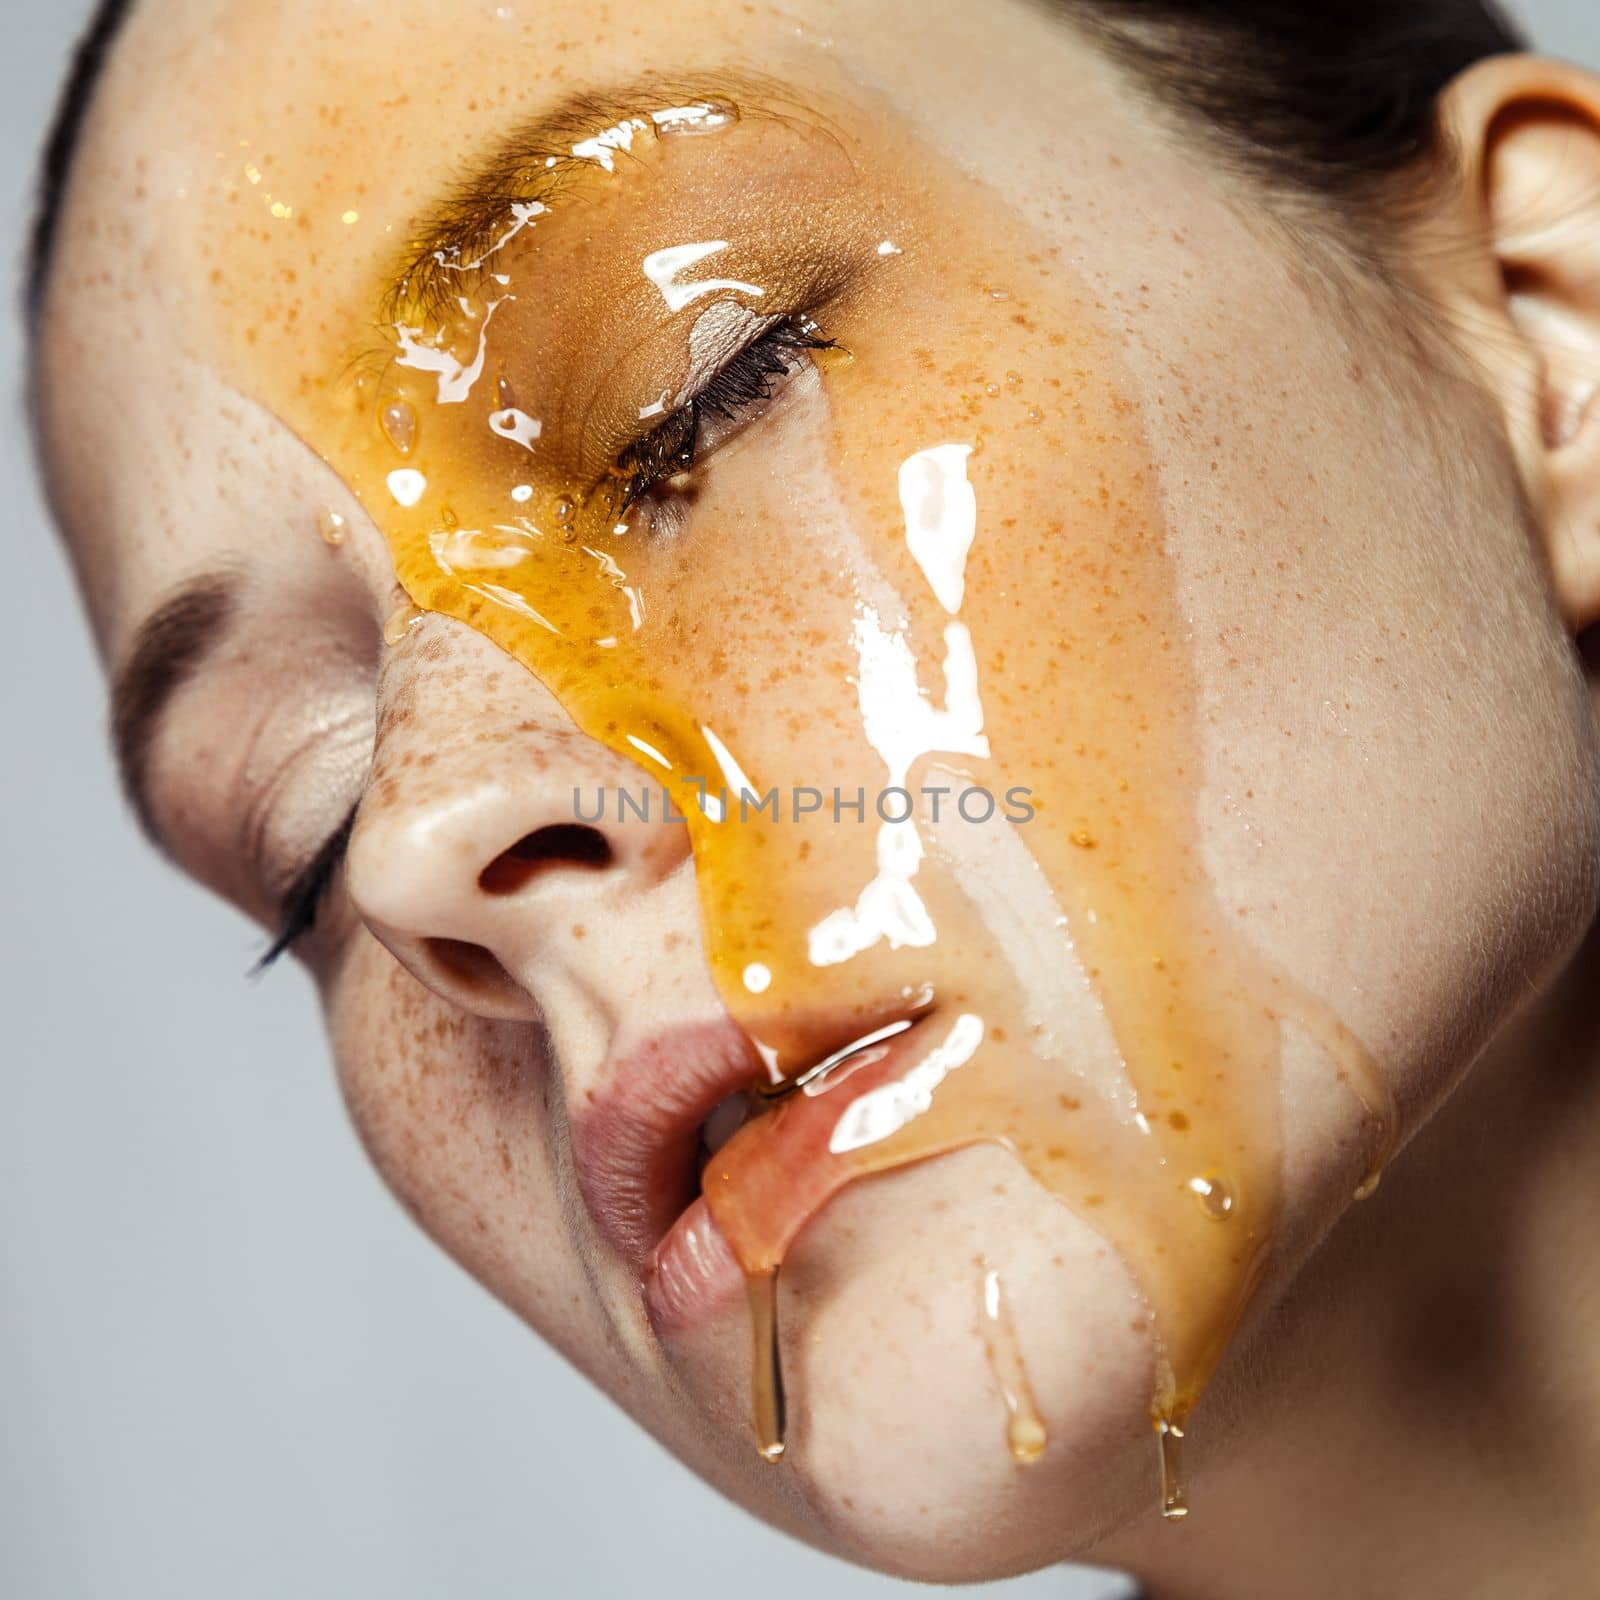 Closeup profile portrait of relaxed calm young brunette woman with freckles, standing with closed eyes, doing skin care procedures with honey mask. Indoor studio shot isolated on gray background.